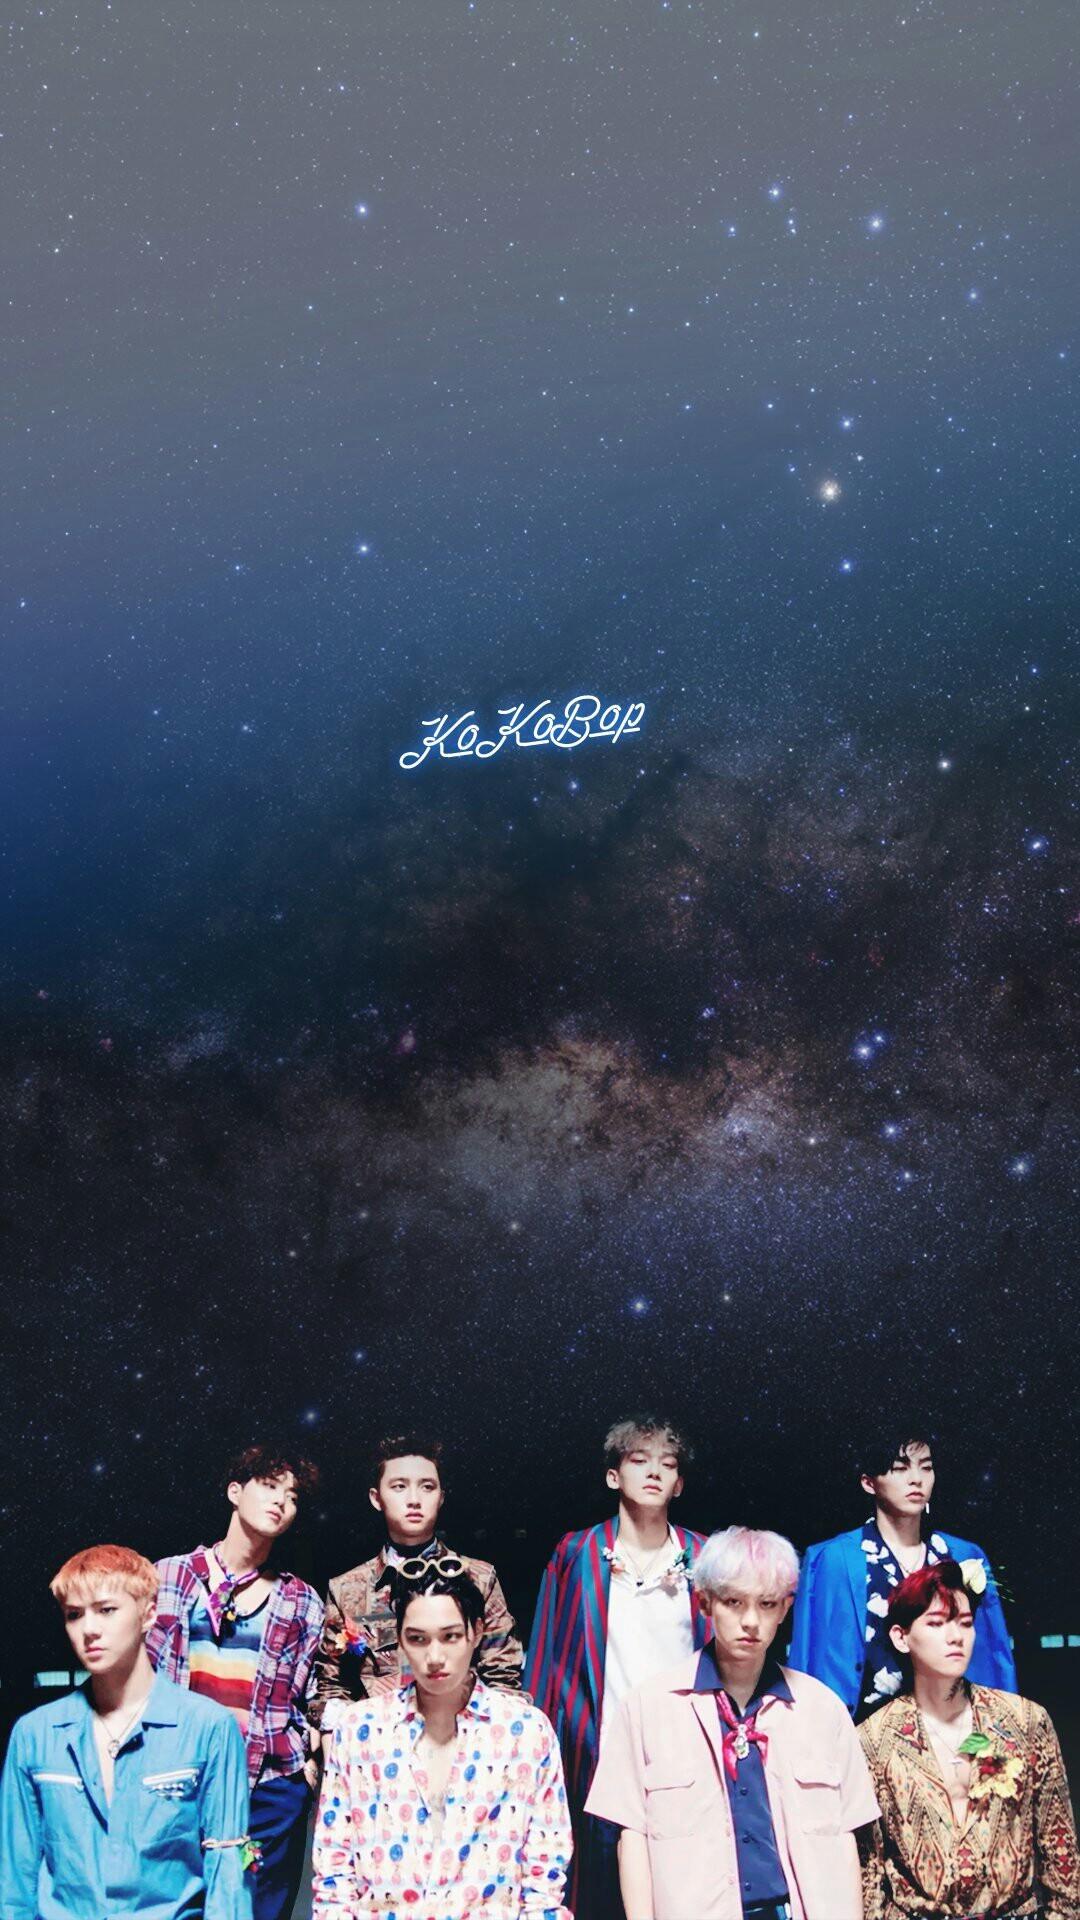 Exo Wallpaper for iPhone